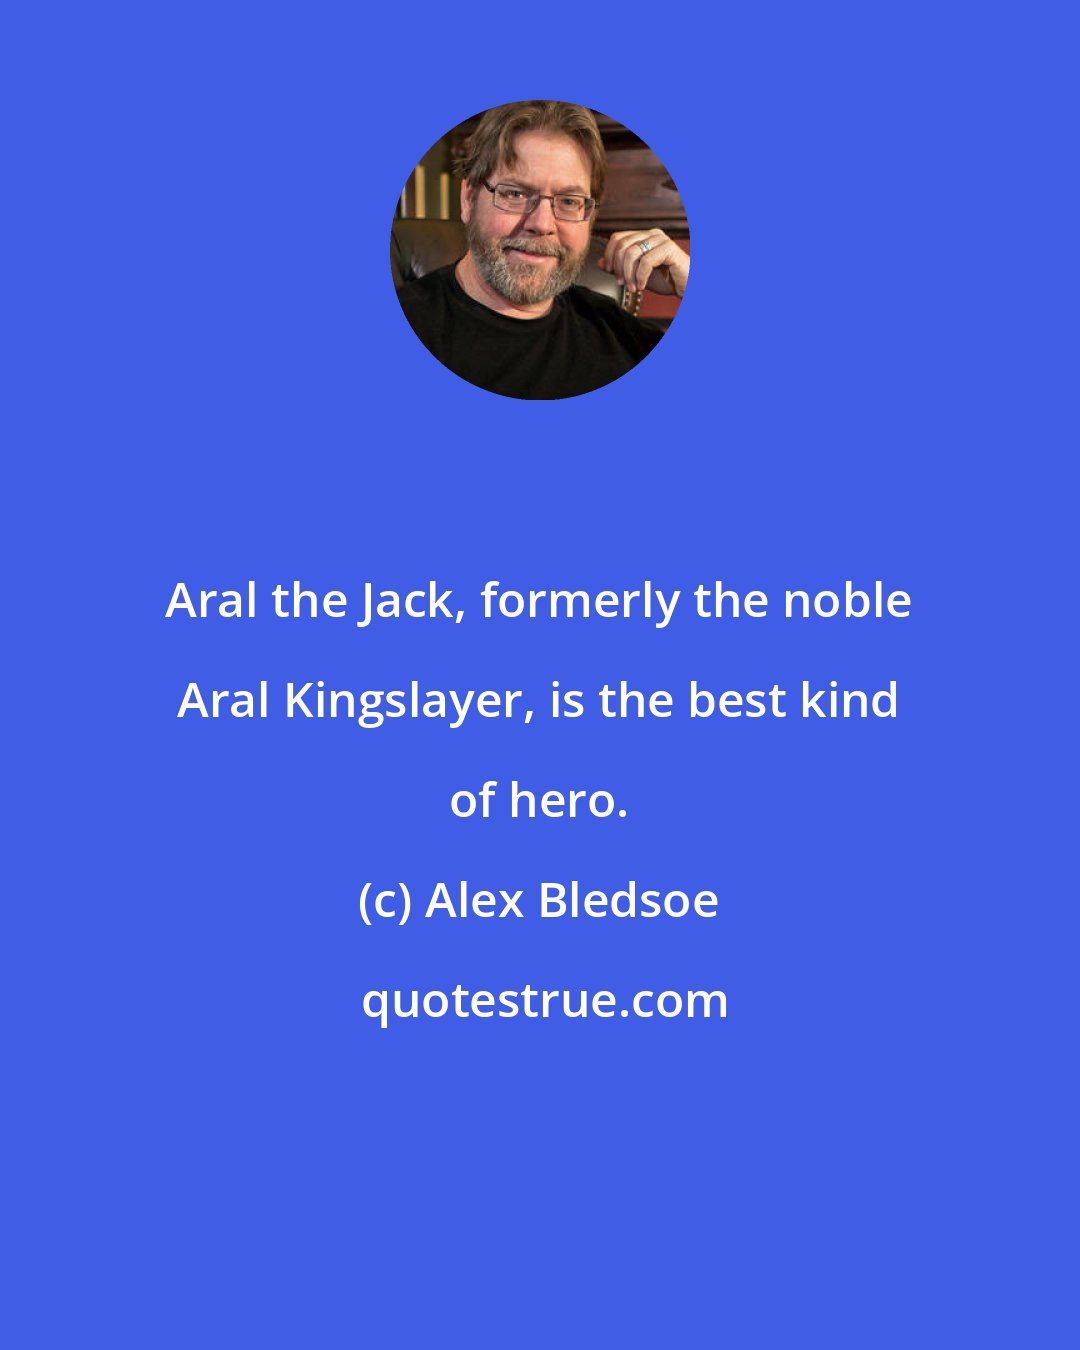 Alex Bledsoe: Aral the Jack, formerly the noble Aral Kingslayer, is the best kind of hero.